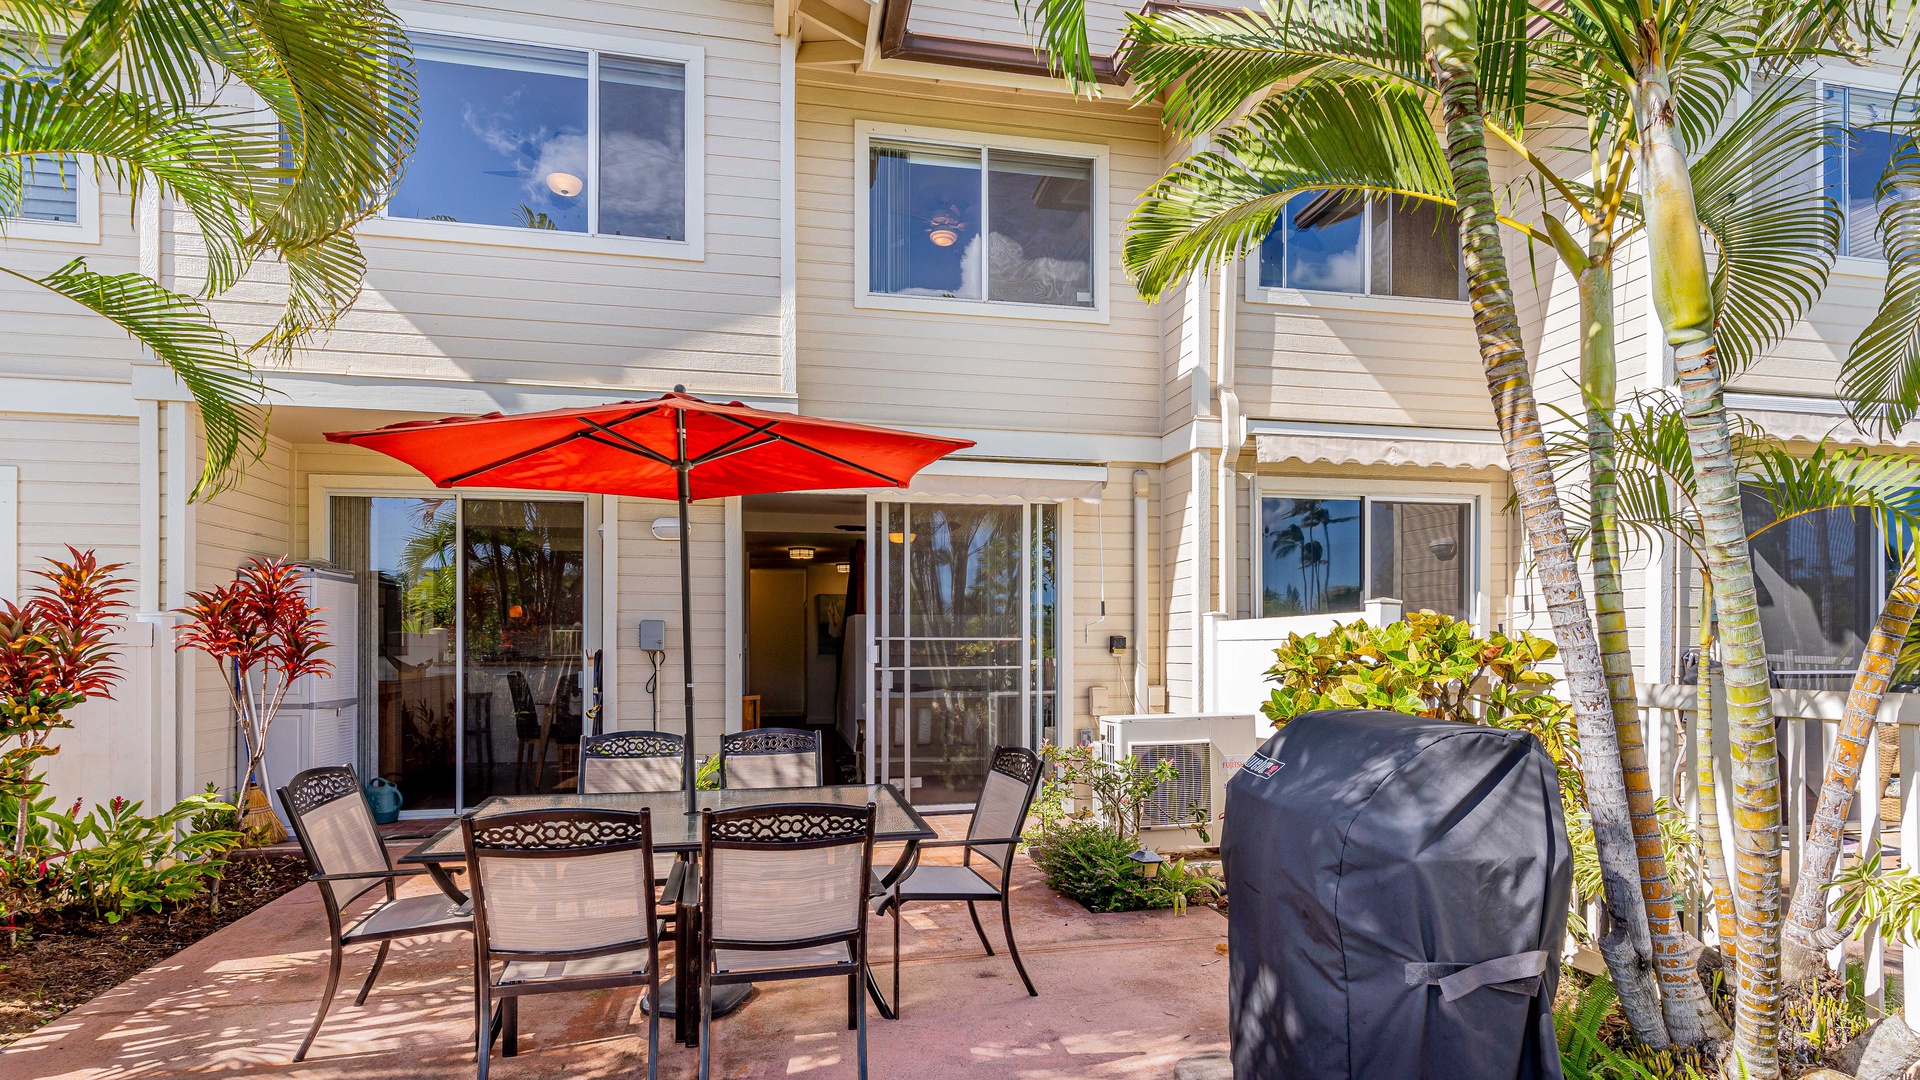 Kapolei Vacation Rentals, Fairways at Ko Olina 20G - A view outside of this charming stay under sun dappled palms.